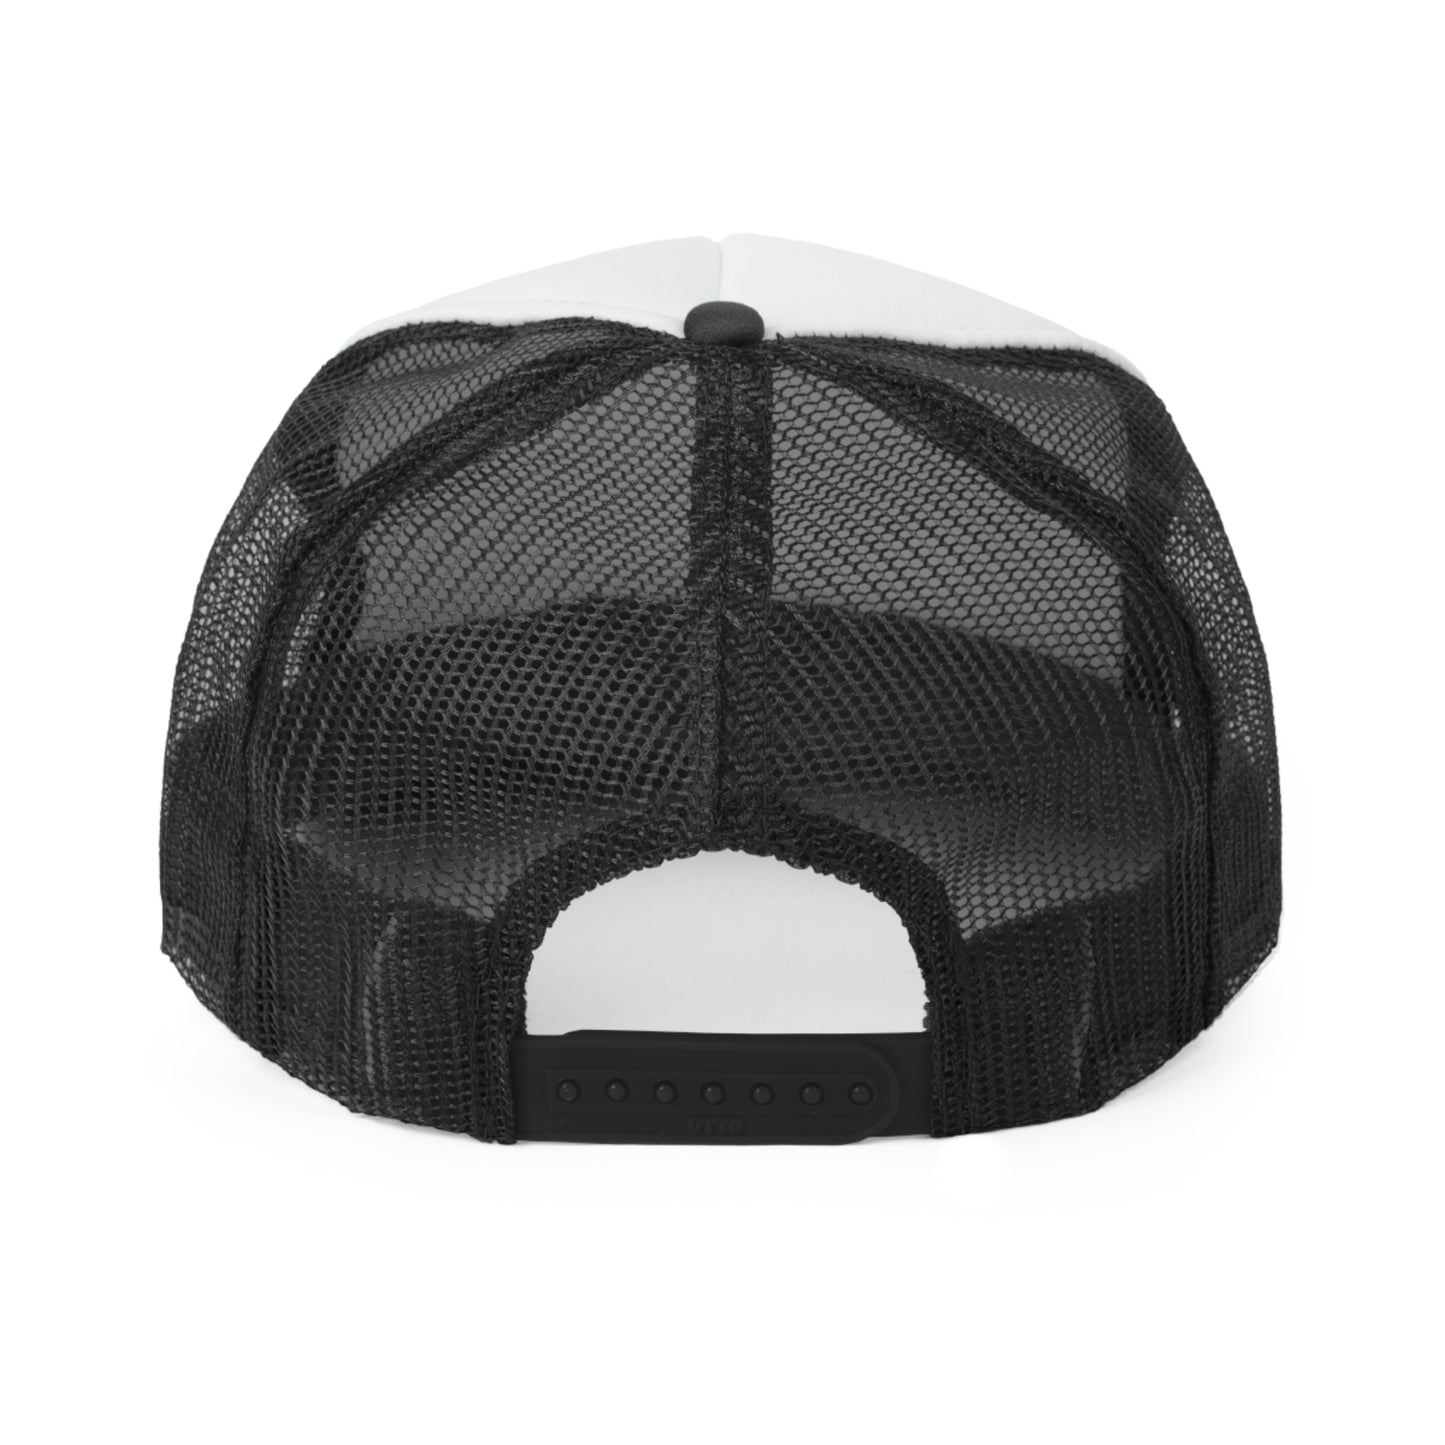 Caddy Couture Trucker Caps